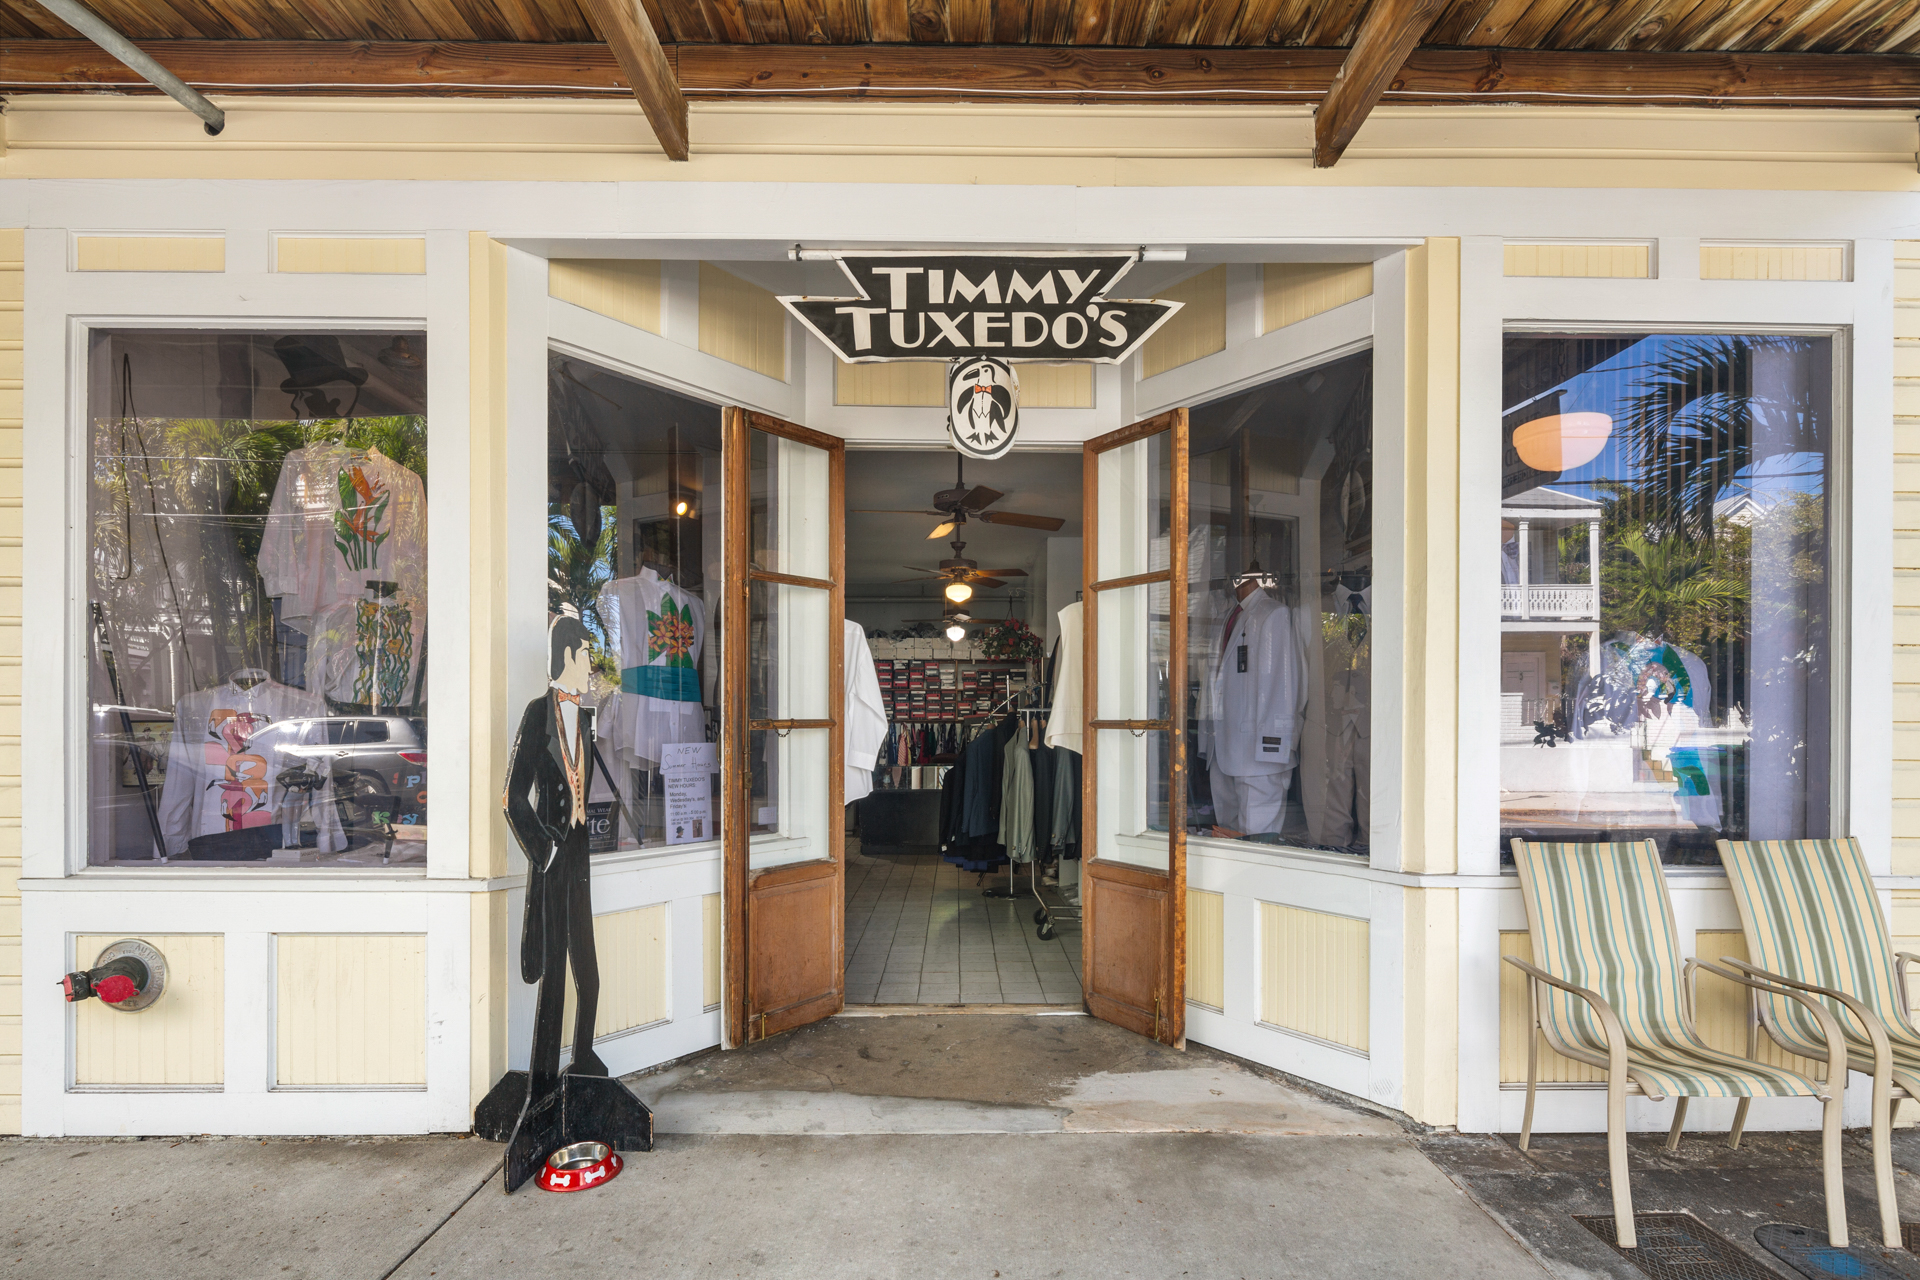 Commercial real estate for sale: Timmy Tuxedo's